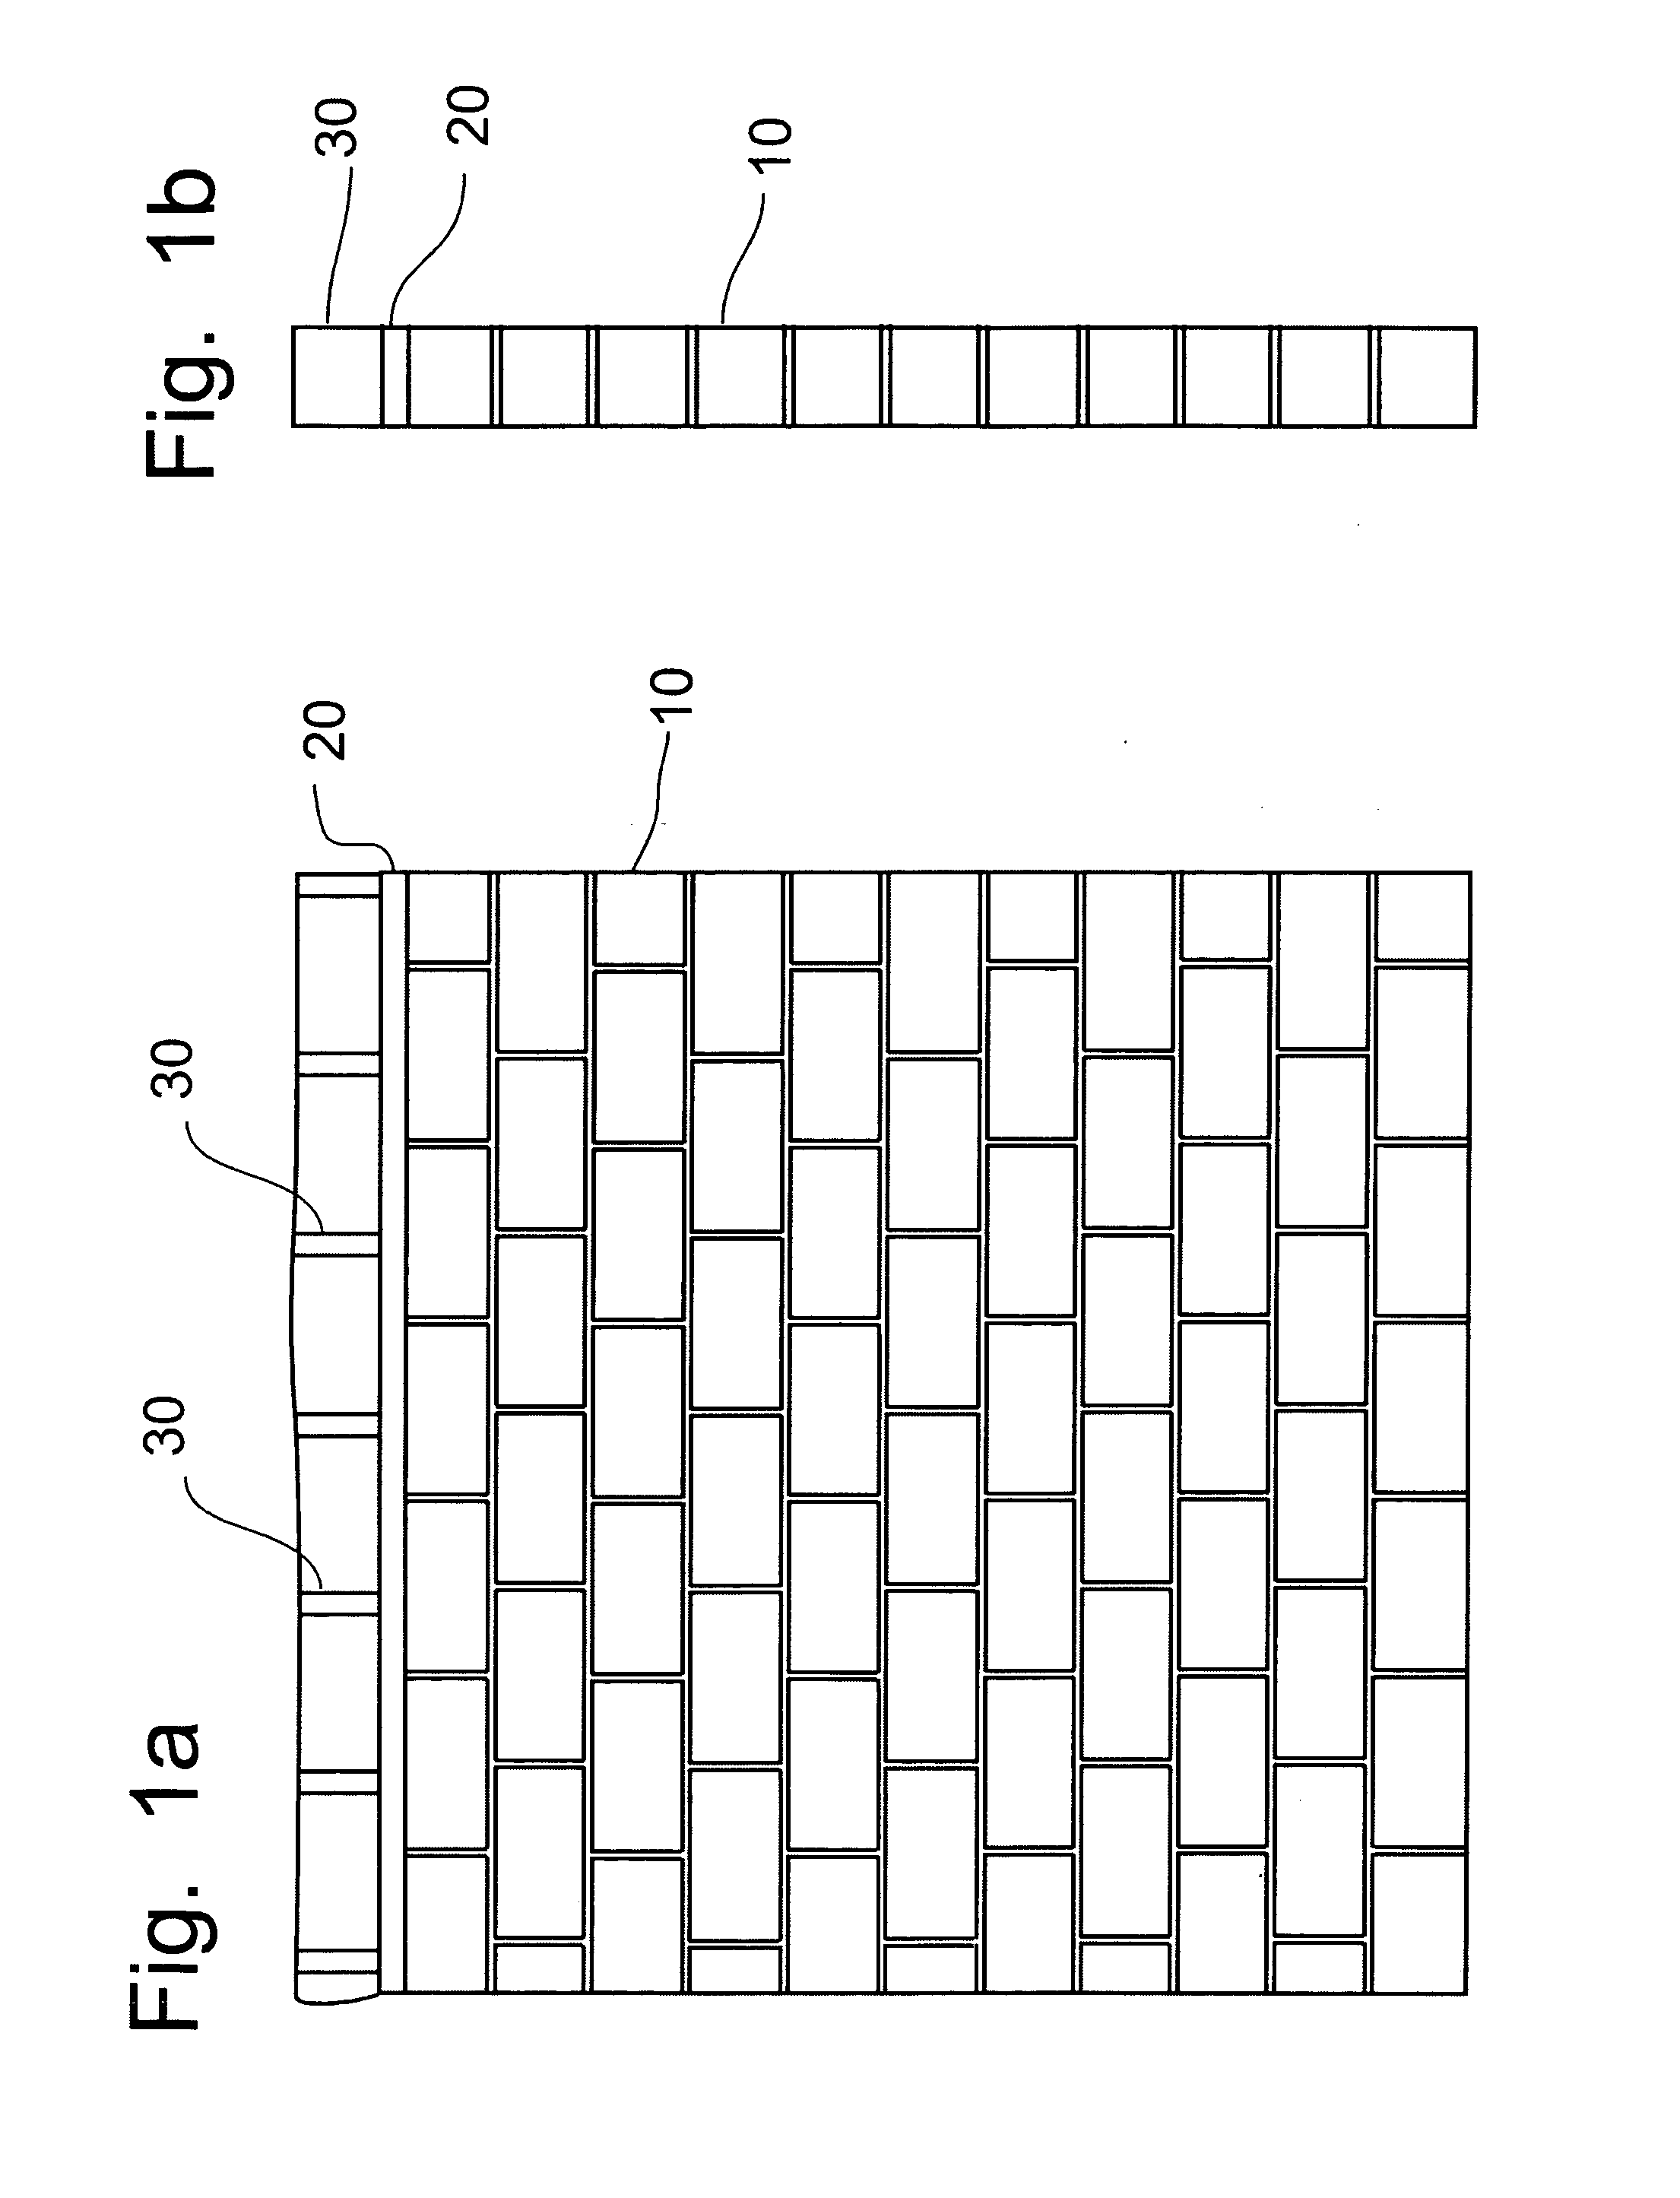 Insulation system with variable position vapor retarder